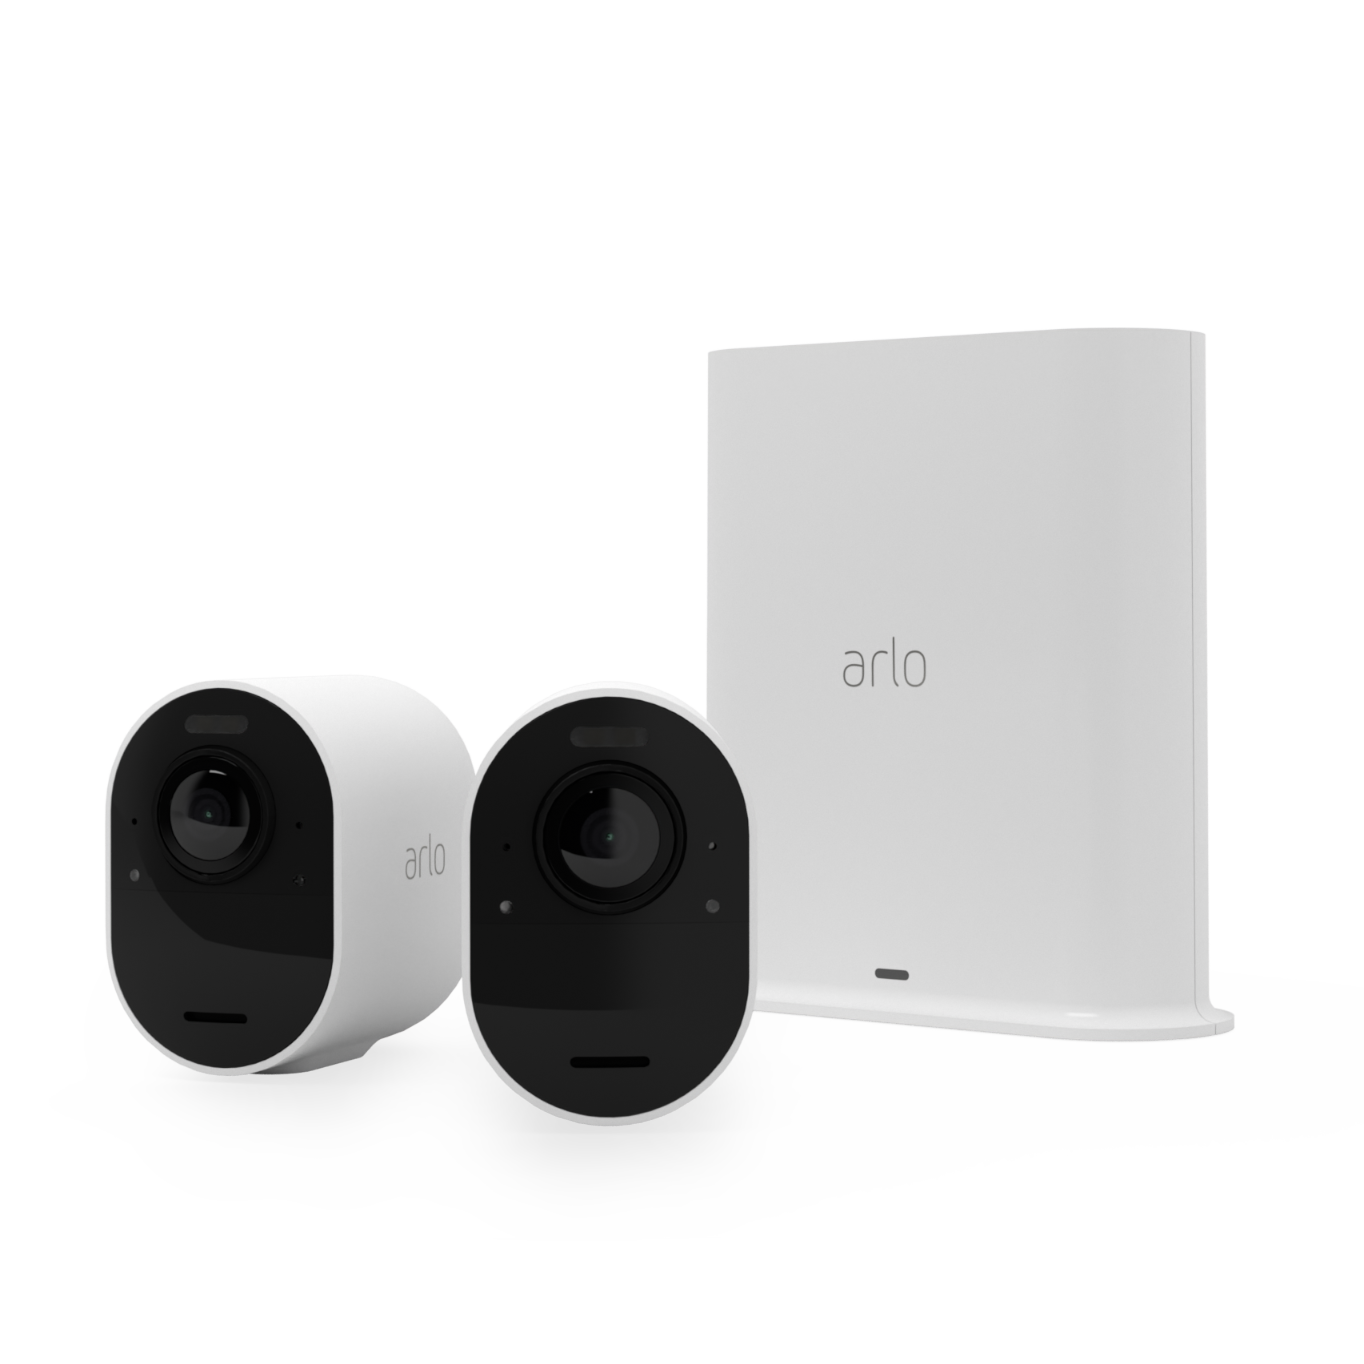 Arlo Ultra Wireless Smart Security System with Two 4K HDR Cameras (VMS5240-100EUS) - New